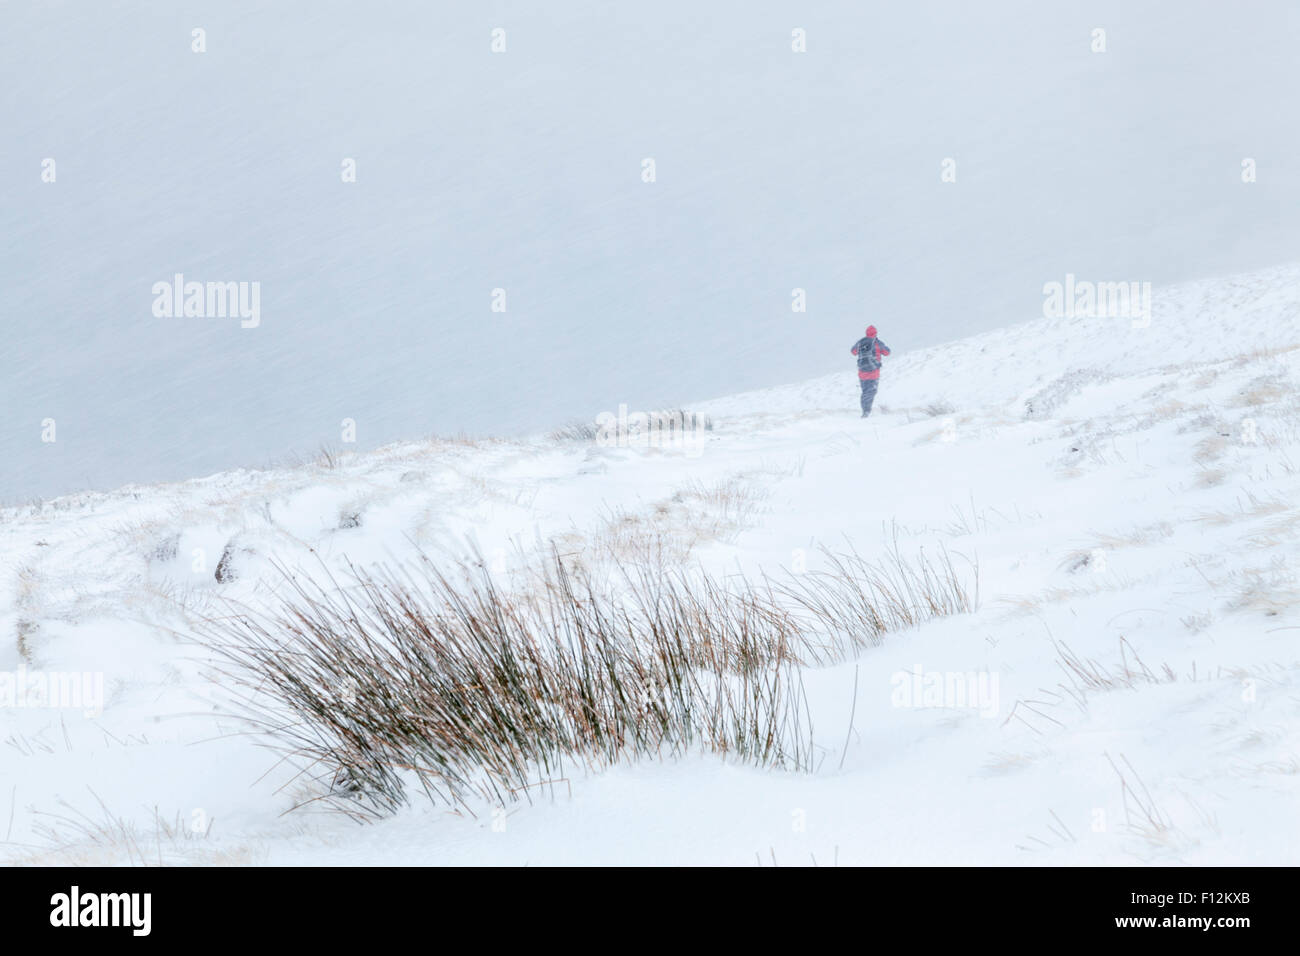 A blizzard on moorland countryside with a hiker walking alone in the bad weather. Winter snow storm on Kinder Scout, Derbyshire, England, UK Stock Photo